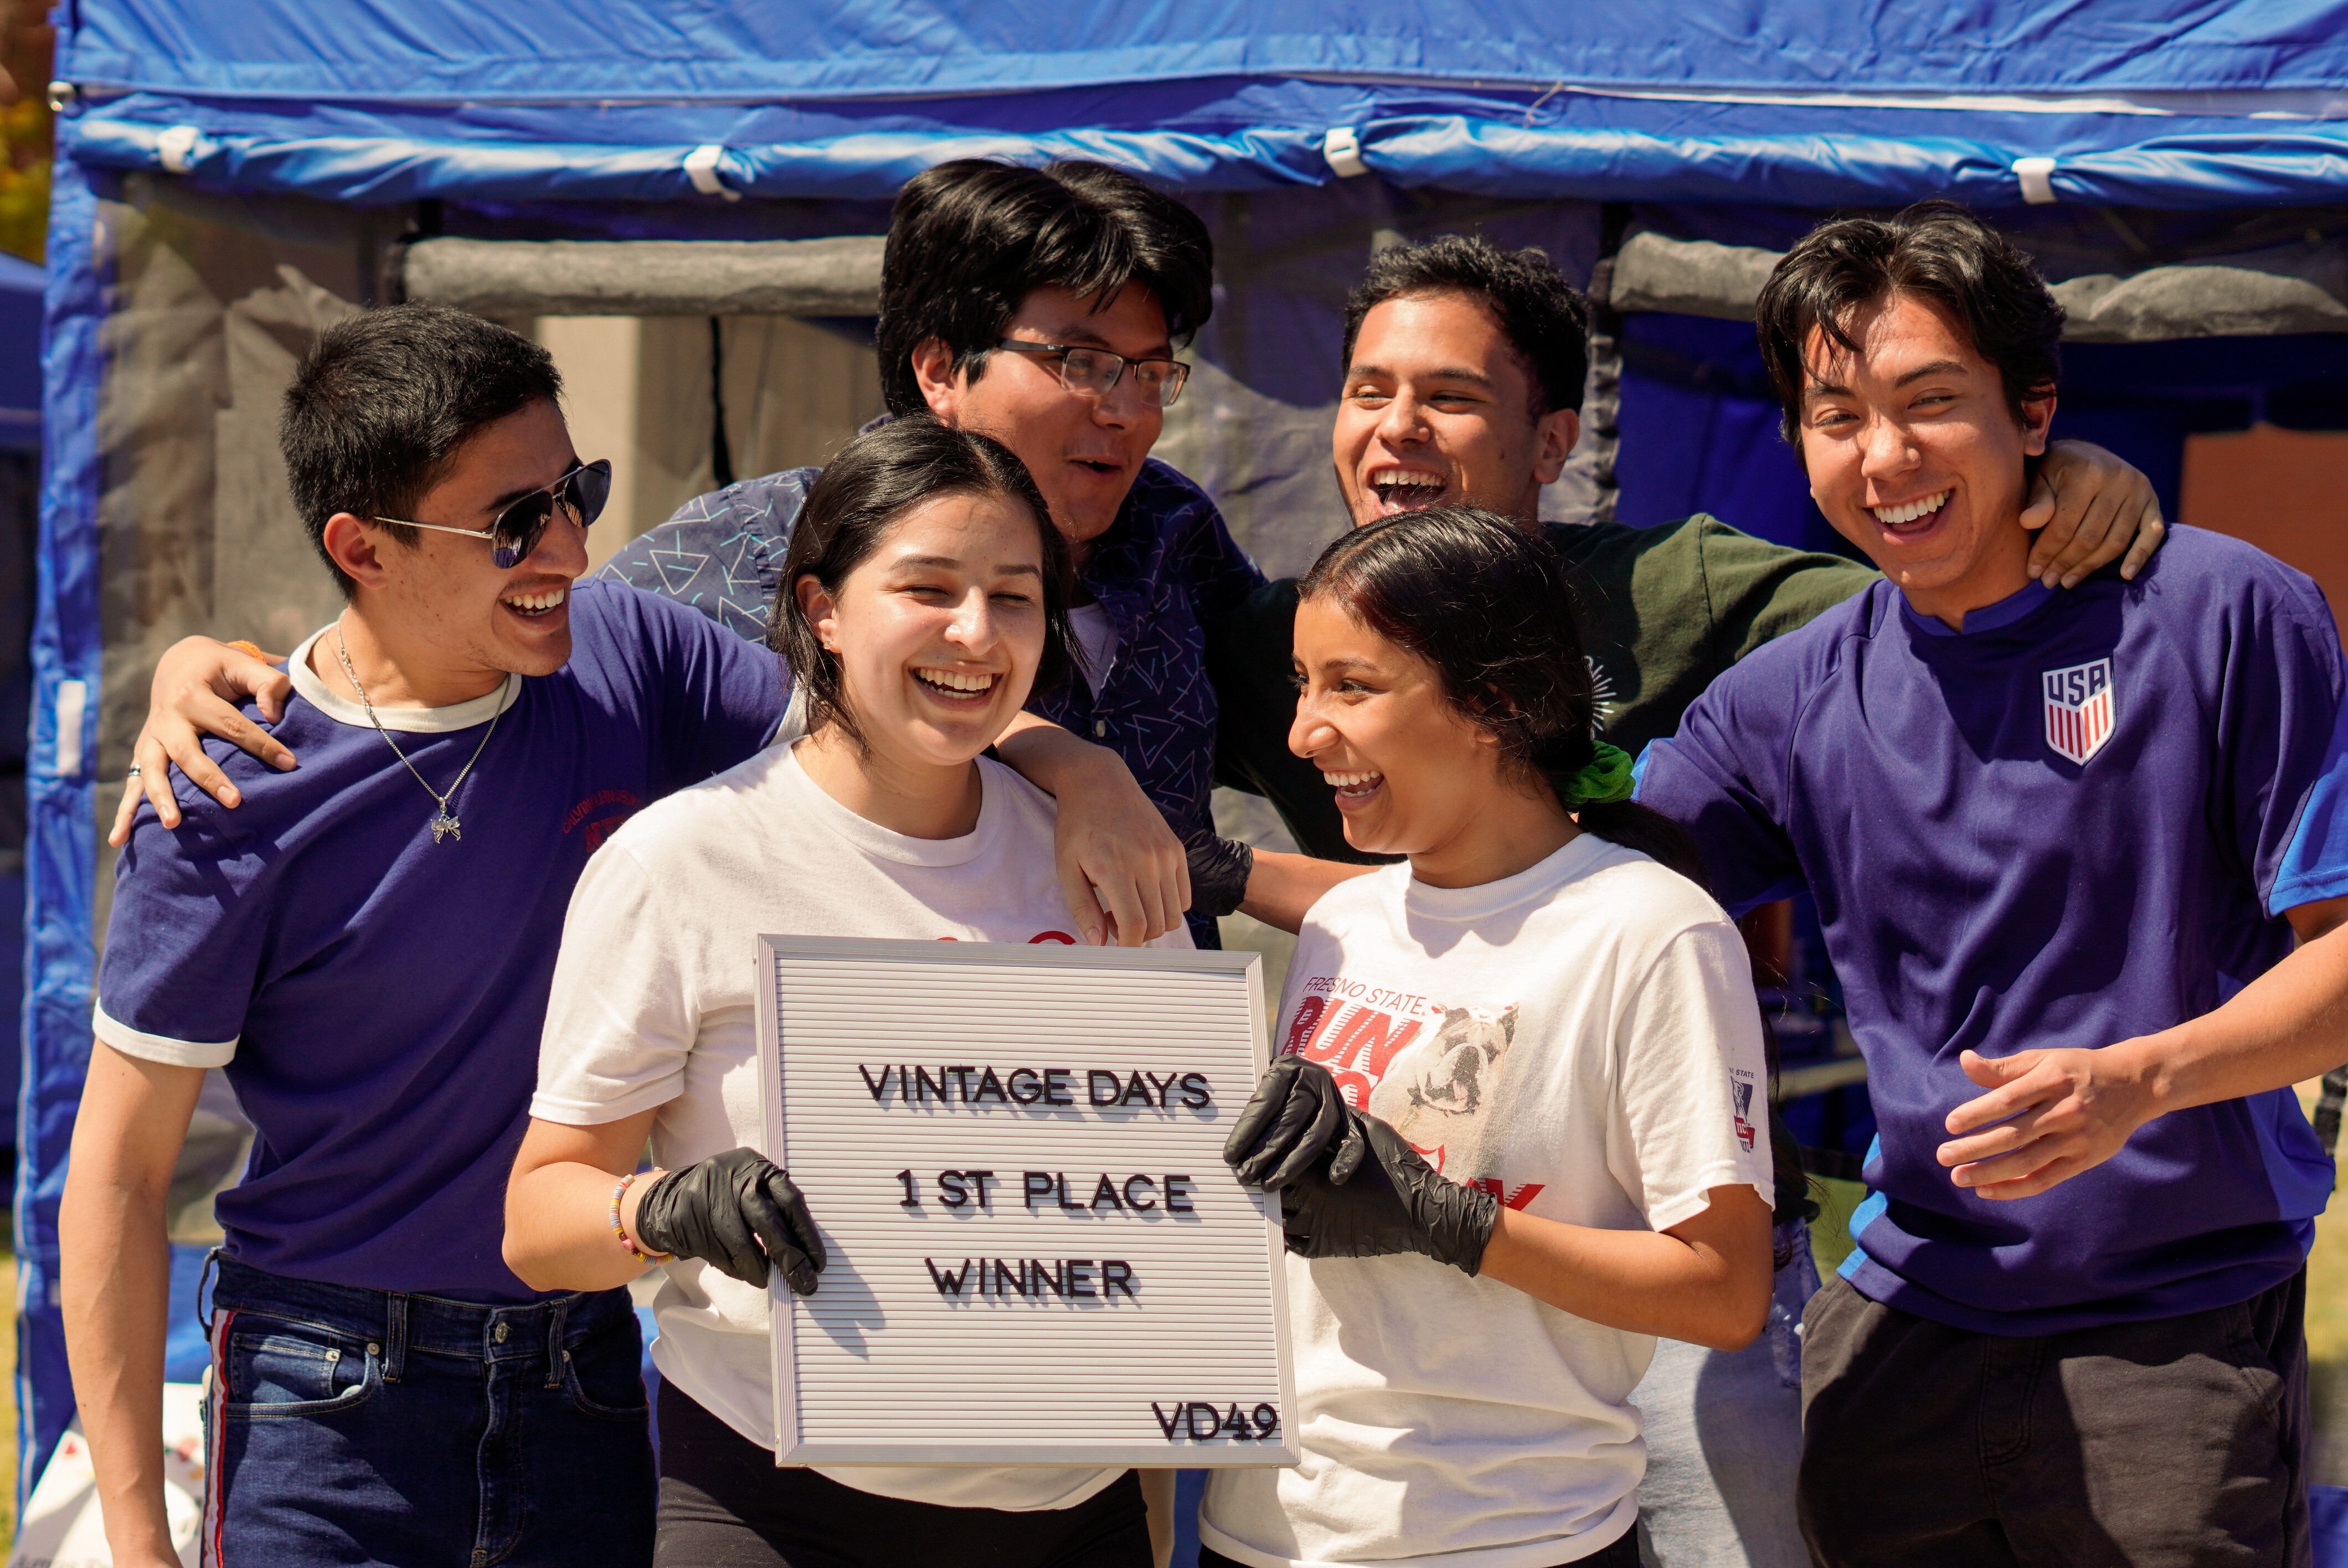 A student organization poses with their sign of victory in the food booth judging competition